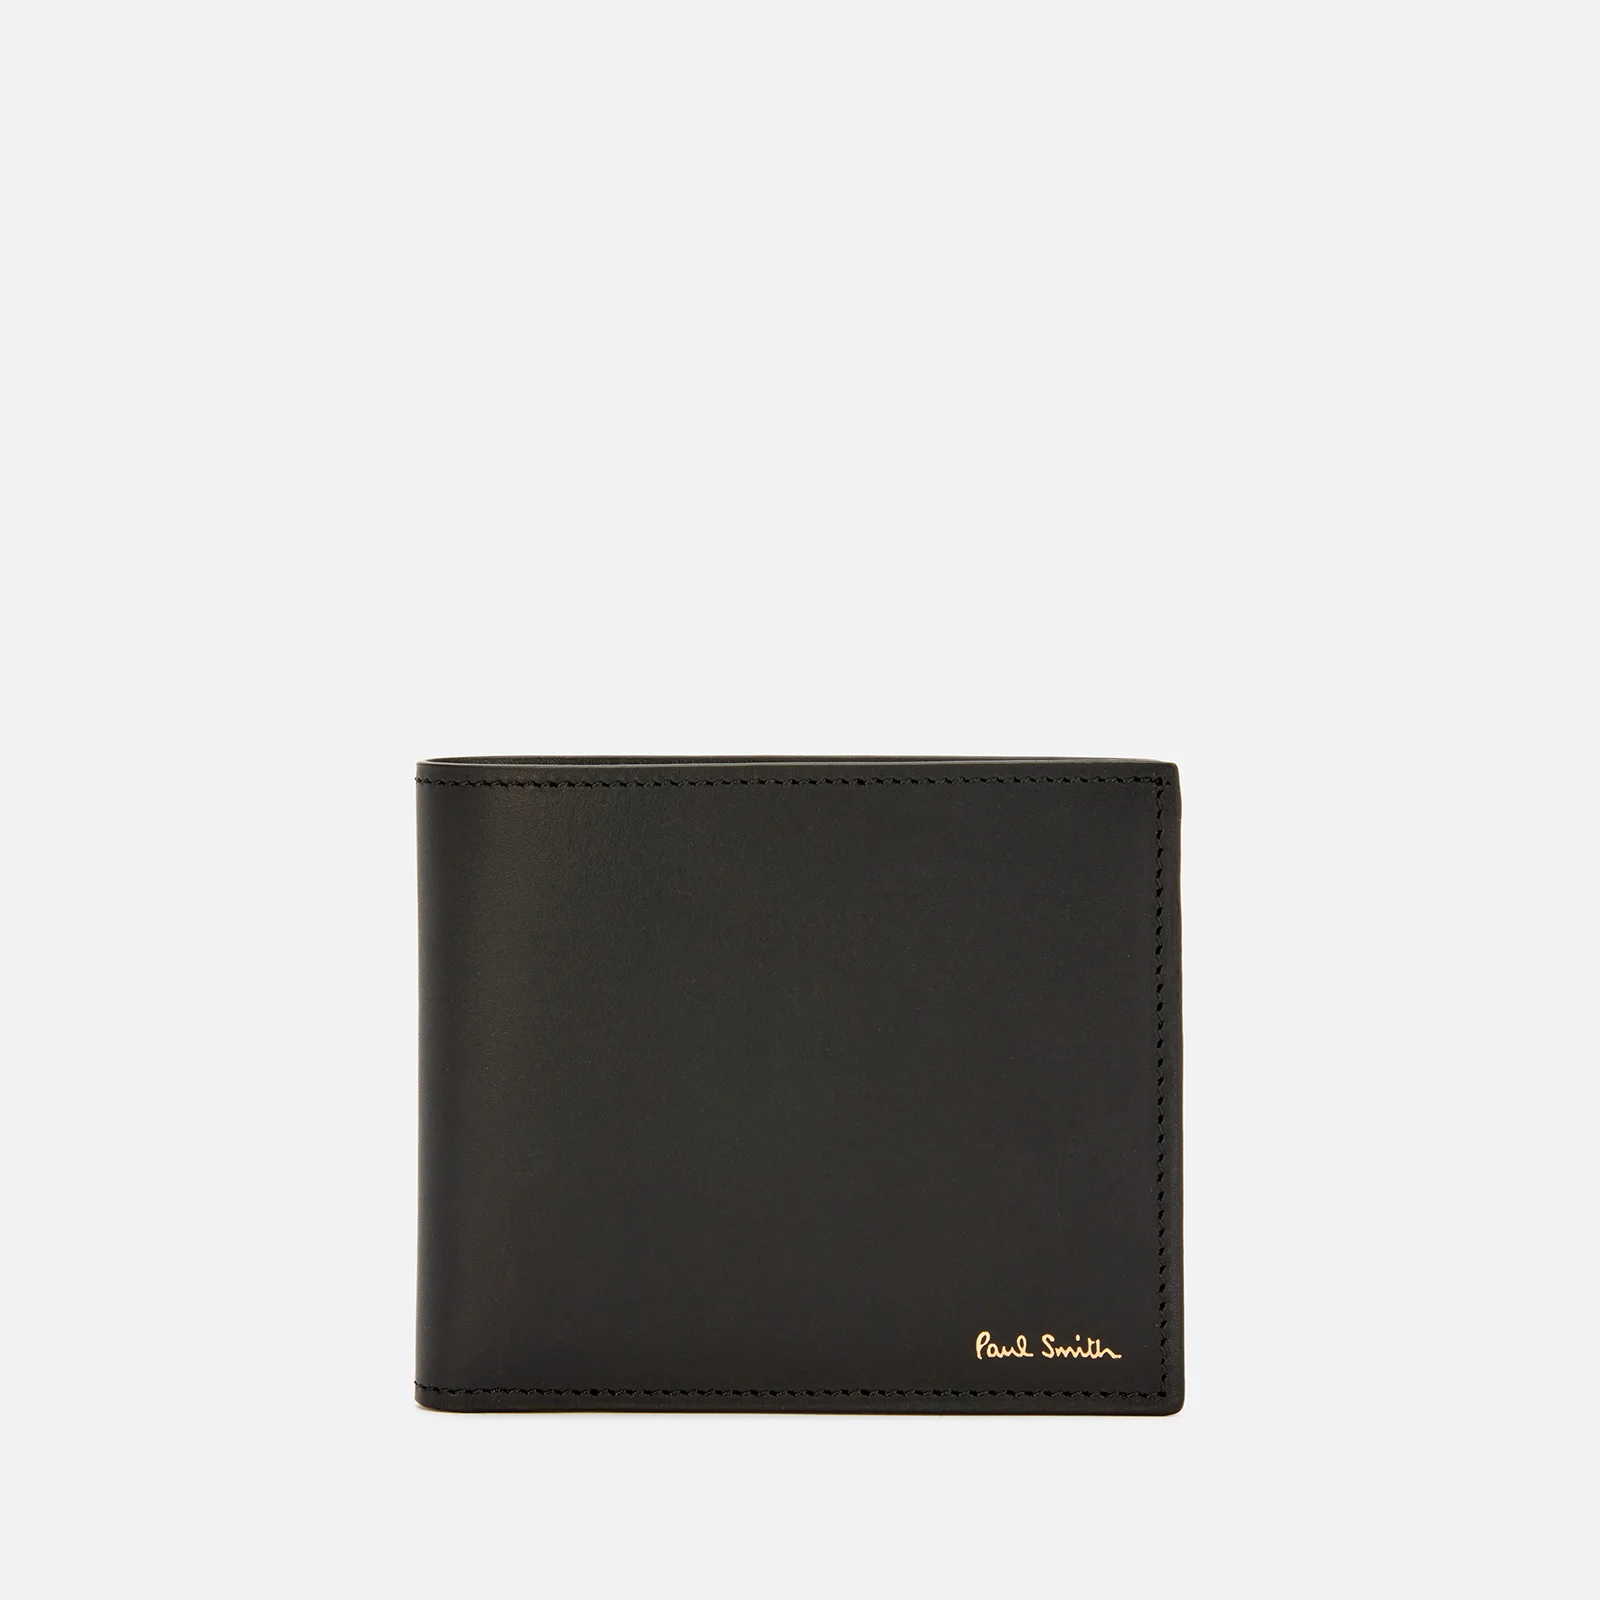 PS Paul Smith Men's Naked Lady Bifold Wallet - Black Image 1